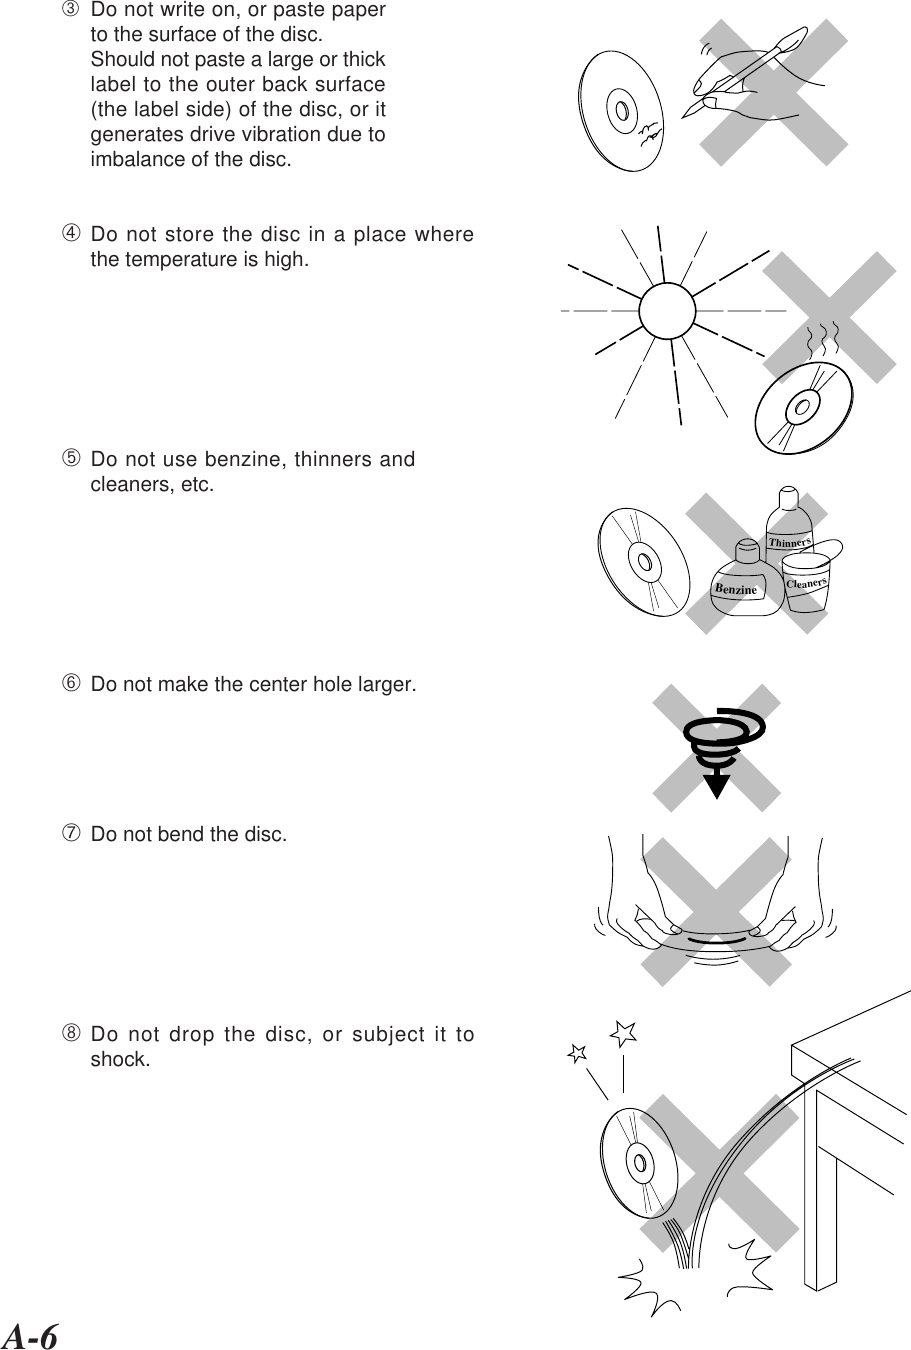 A-6➂Do not write on, or paste paperto the surface of the disc.Should not paste a large or thicklabel to the outer back surface(the label side) of the disc, or itgenerates drive vibration due toimbalance of the disc.➃Do not store the disc in a place wherethe temperature is high.➄Do not use benzine, thinners andcleaners, etc.➅Do not make the center hole larger.➆Do not bend the disc.➇Do not drop the disc, or subject it toshock.ThinnersCleanersBenzine